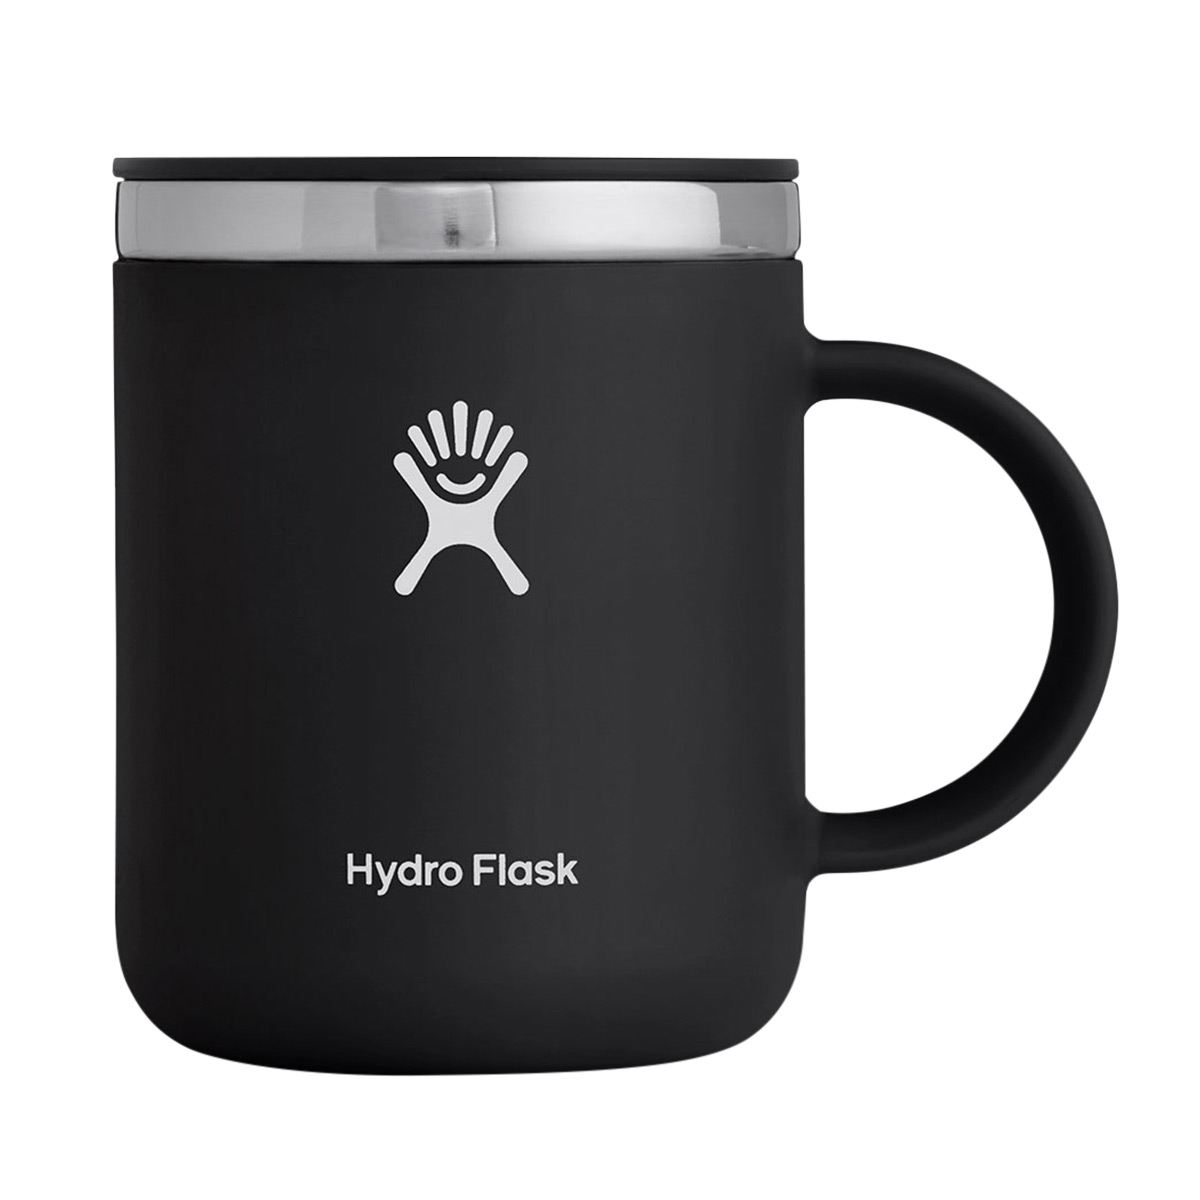 https://www.containerstore.com/catalogimages/482985/10093305-hydro-flask-12-mug-black-ve.jpg